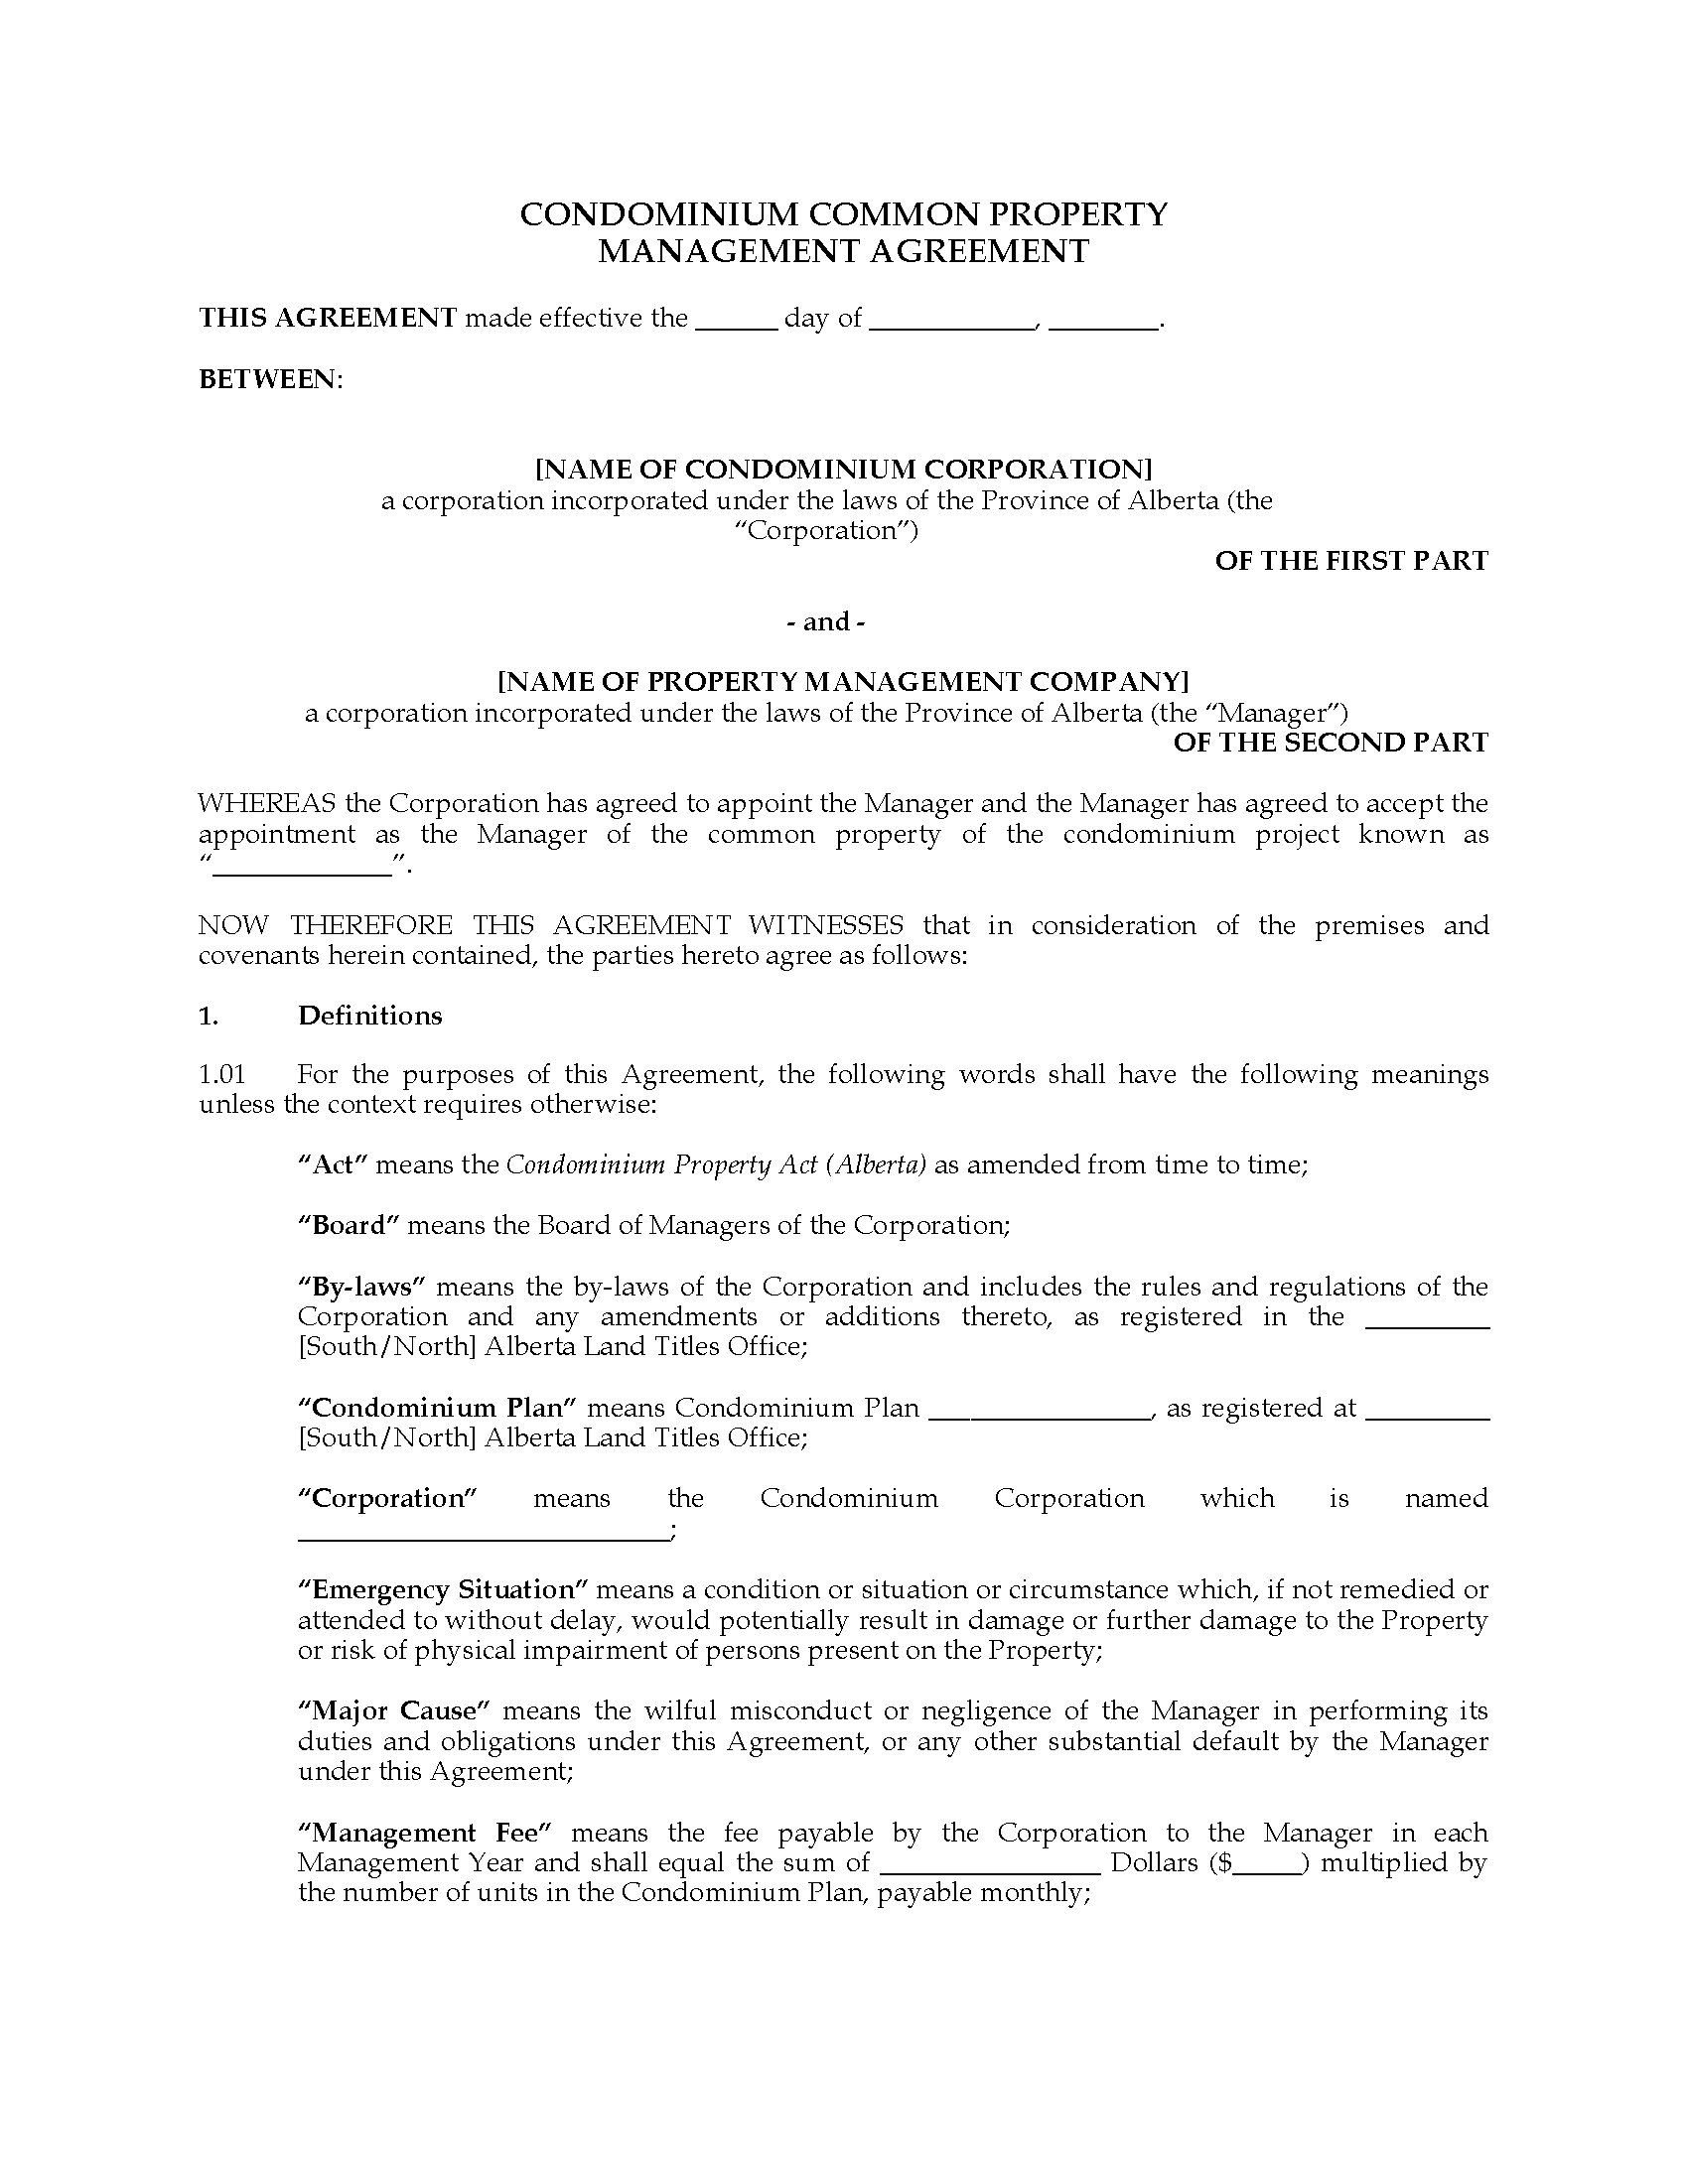 Alberta Condo Common Property Management Agreement  Legal Forms In free commercial property management agreement template